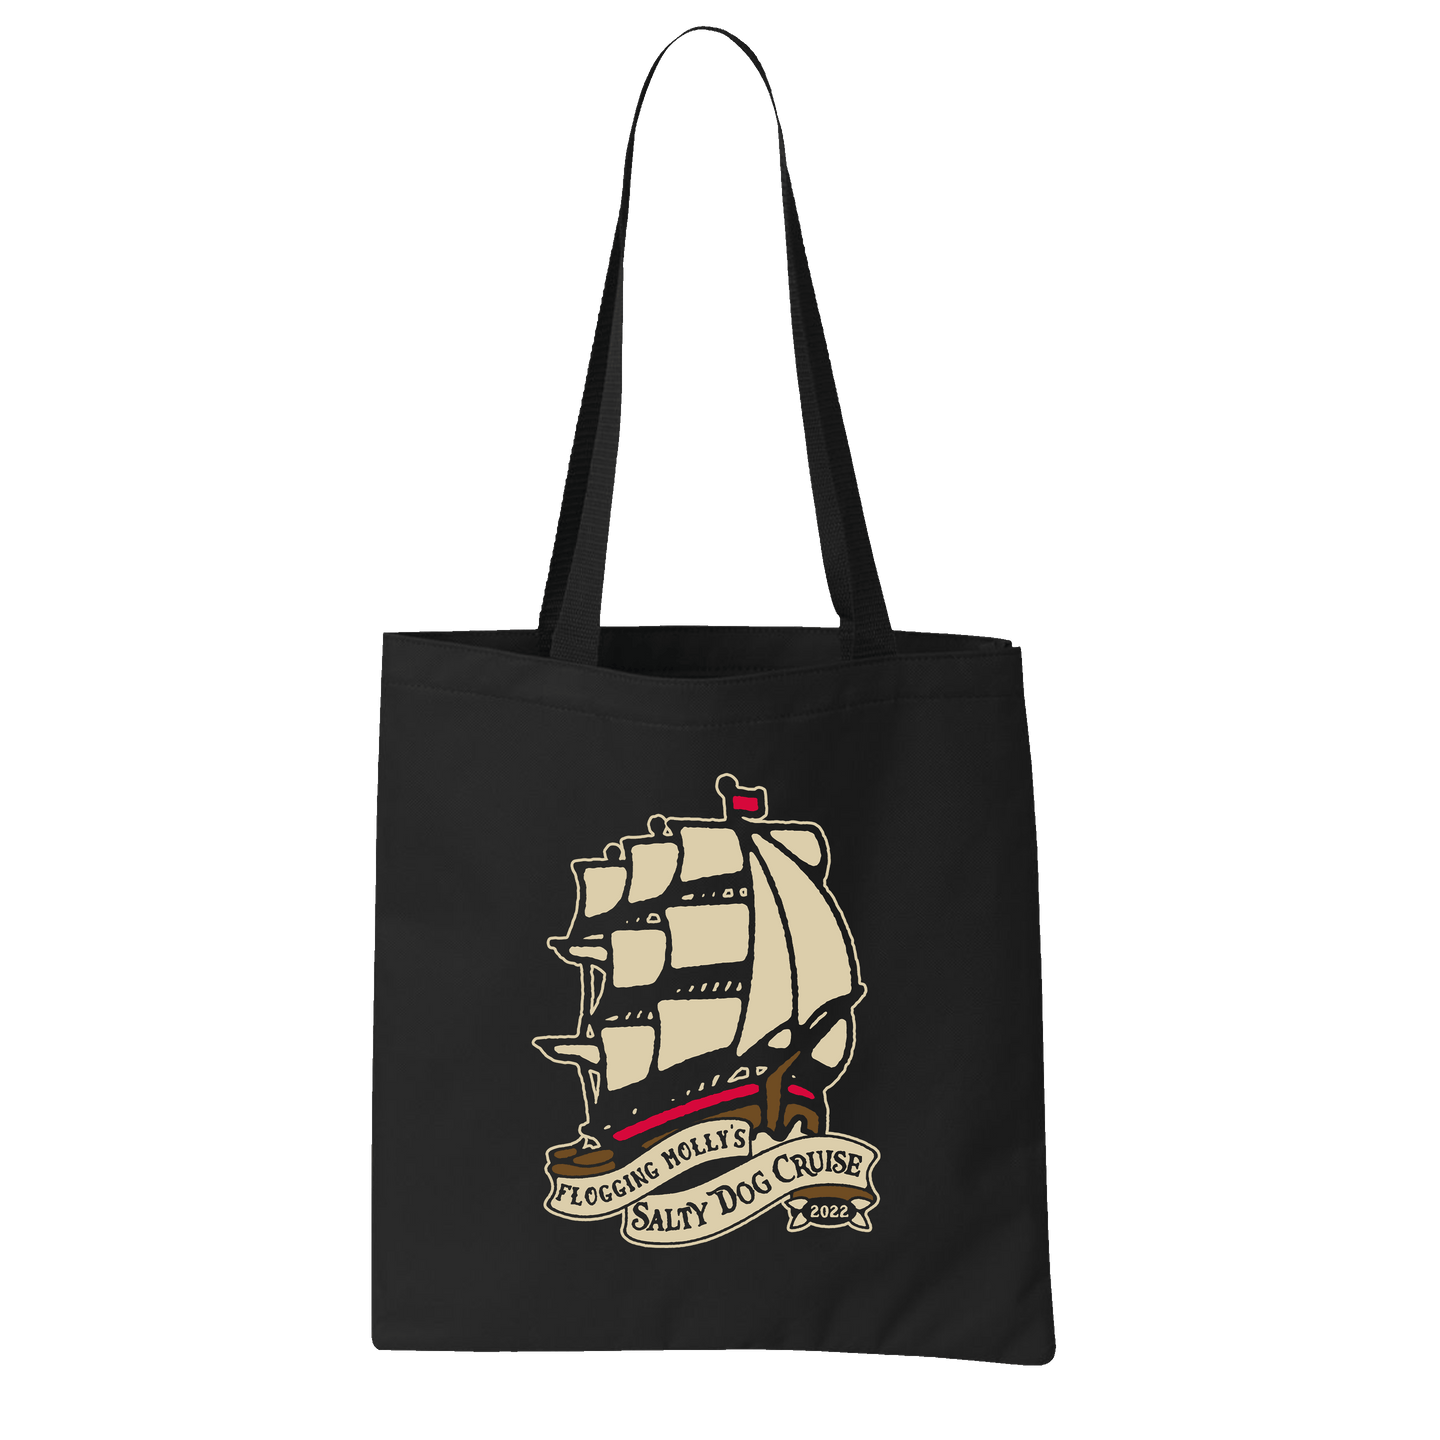 Salty Dog Cruise 2022 Event Tote Bag